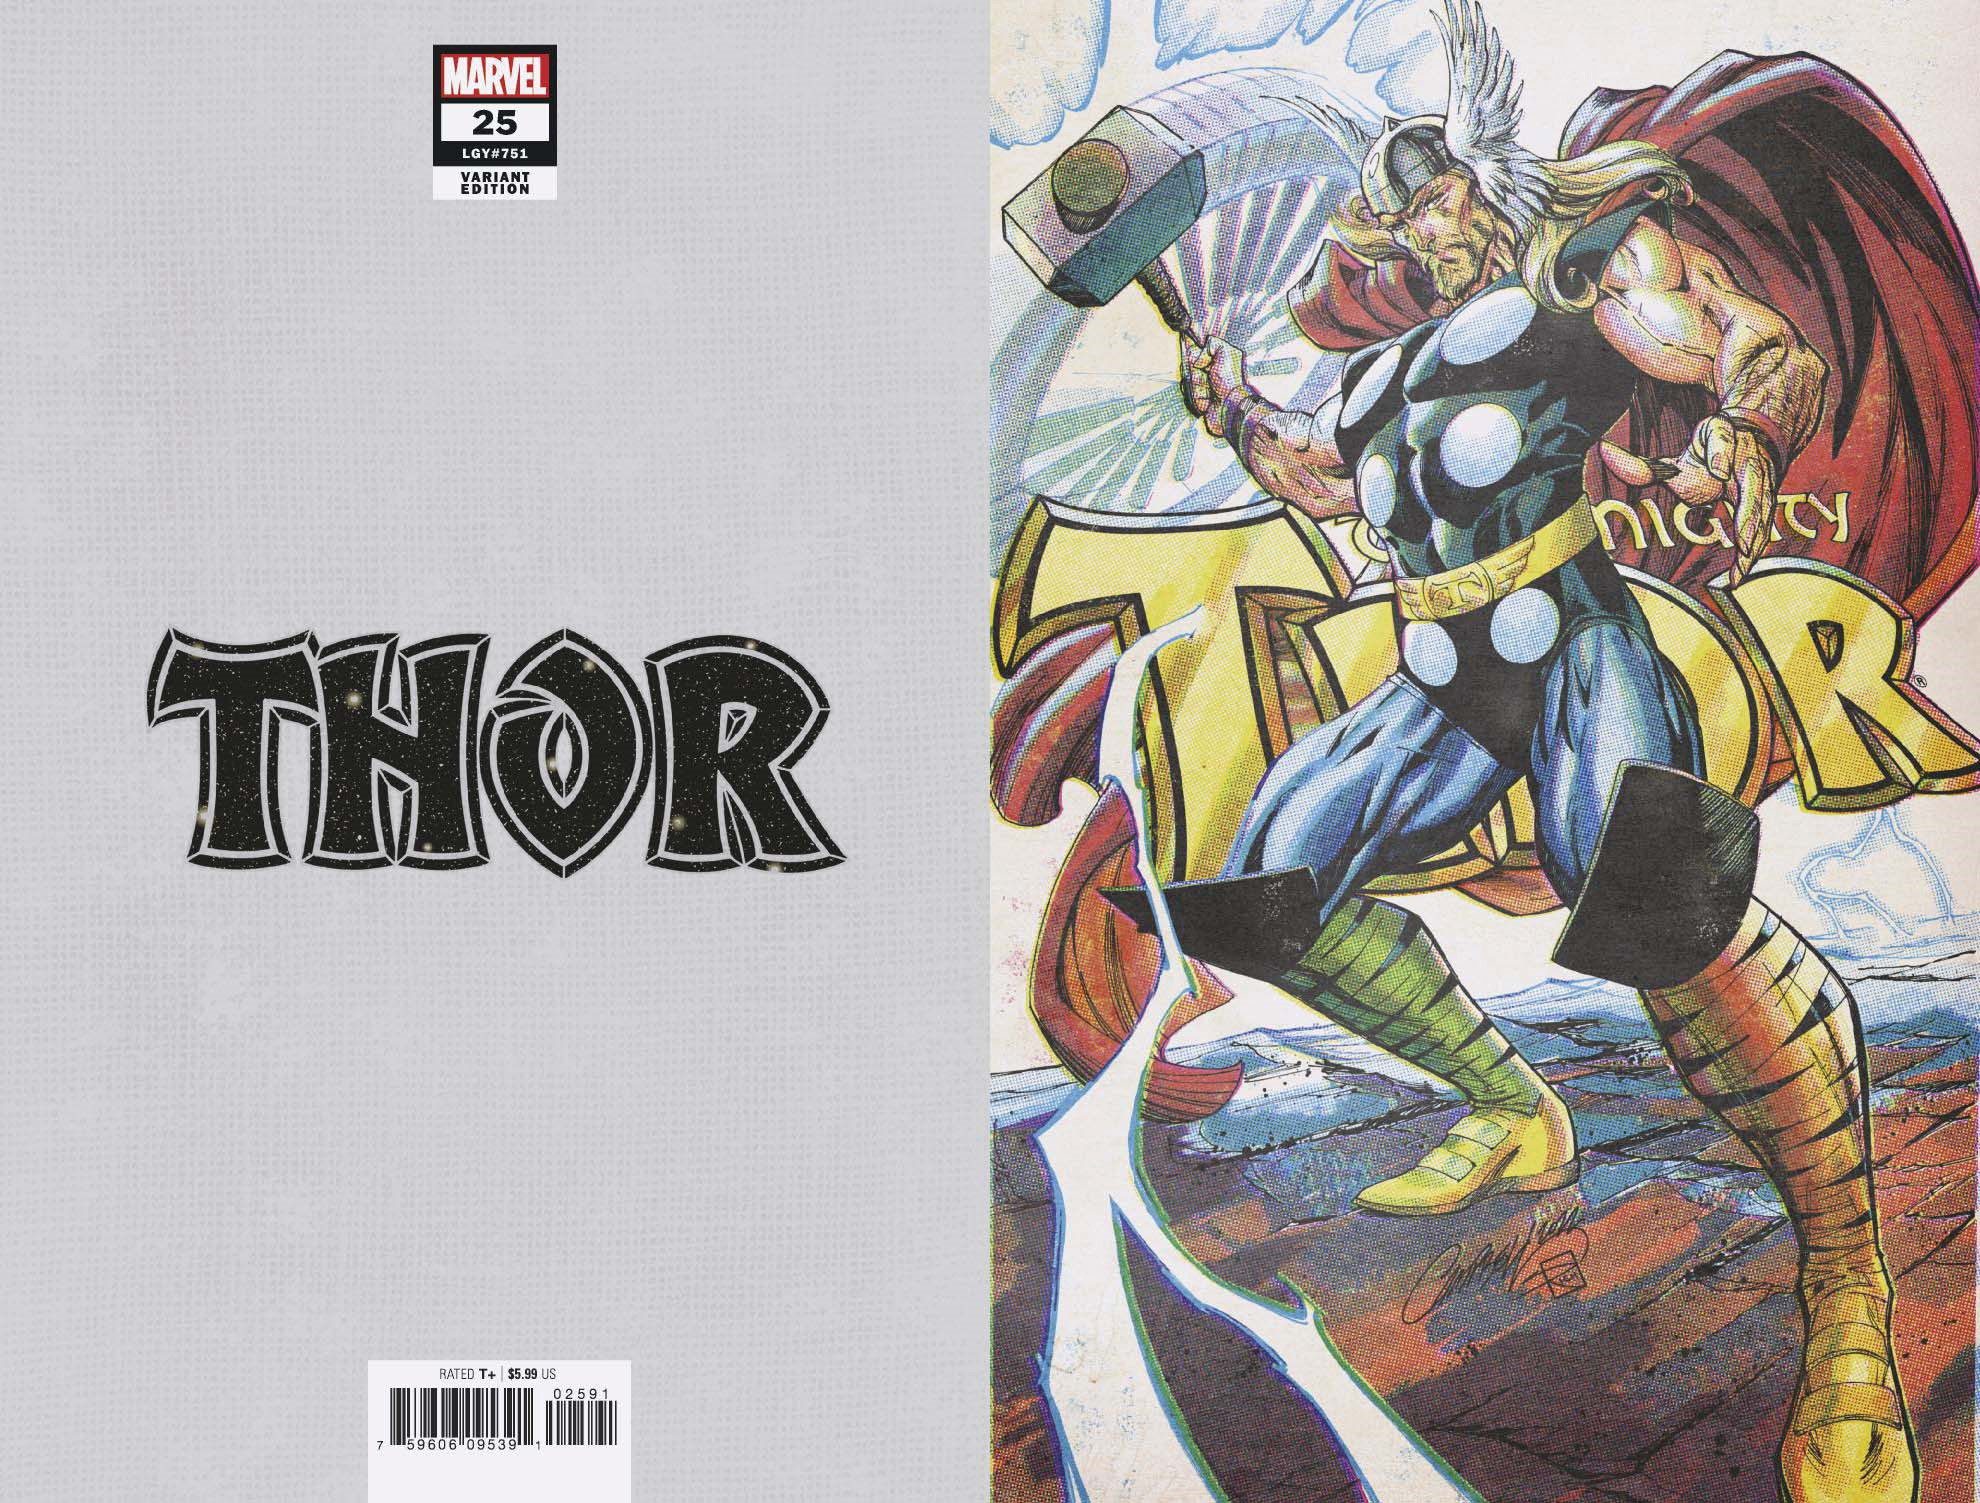 Thor #25 1 for 200 Incentive JS Campbell Retro Variant (2020)